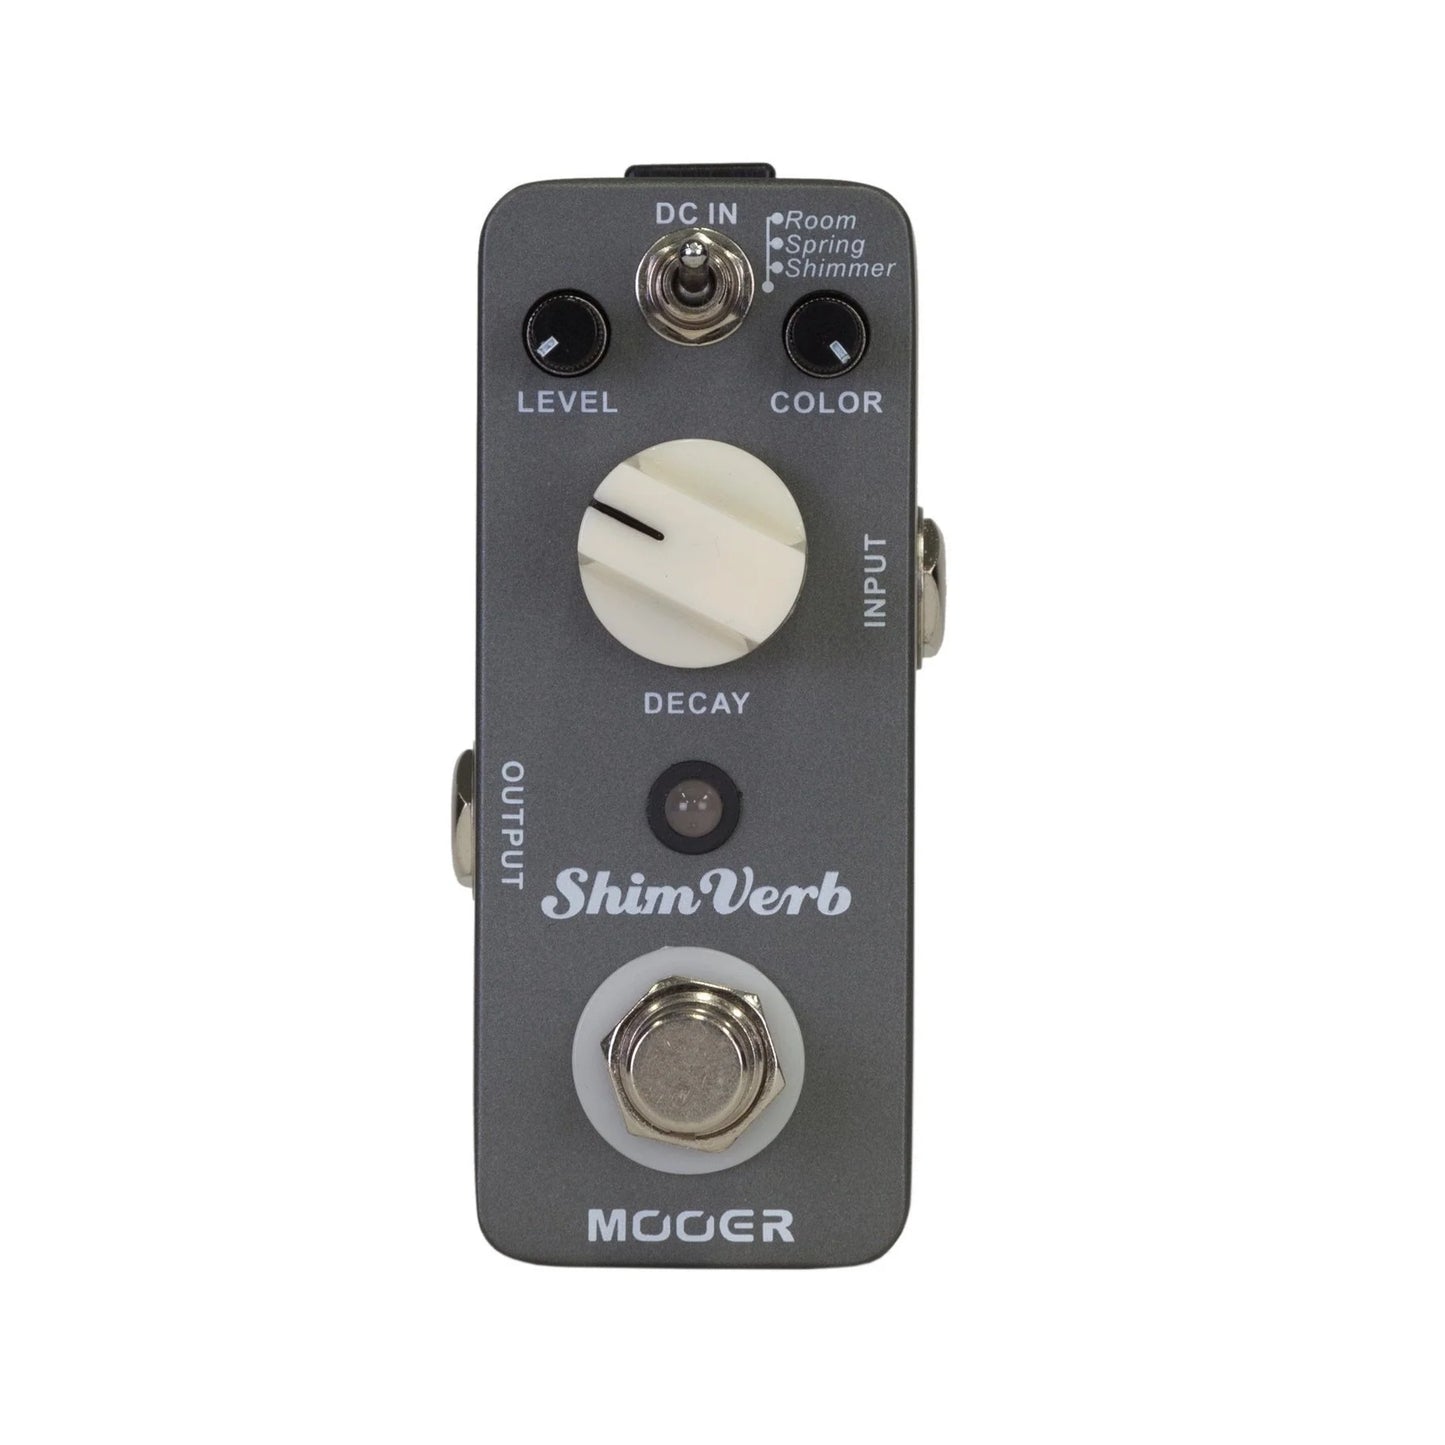 Mooer Shimverb Reverb Effects Pedal - Joondalup Music Centre